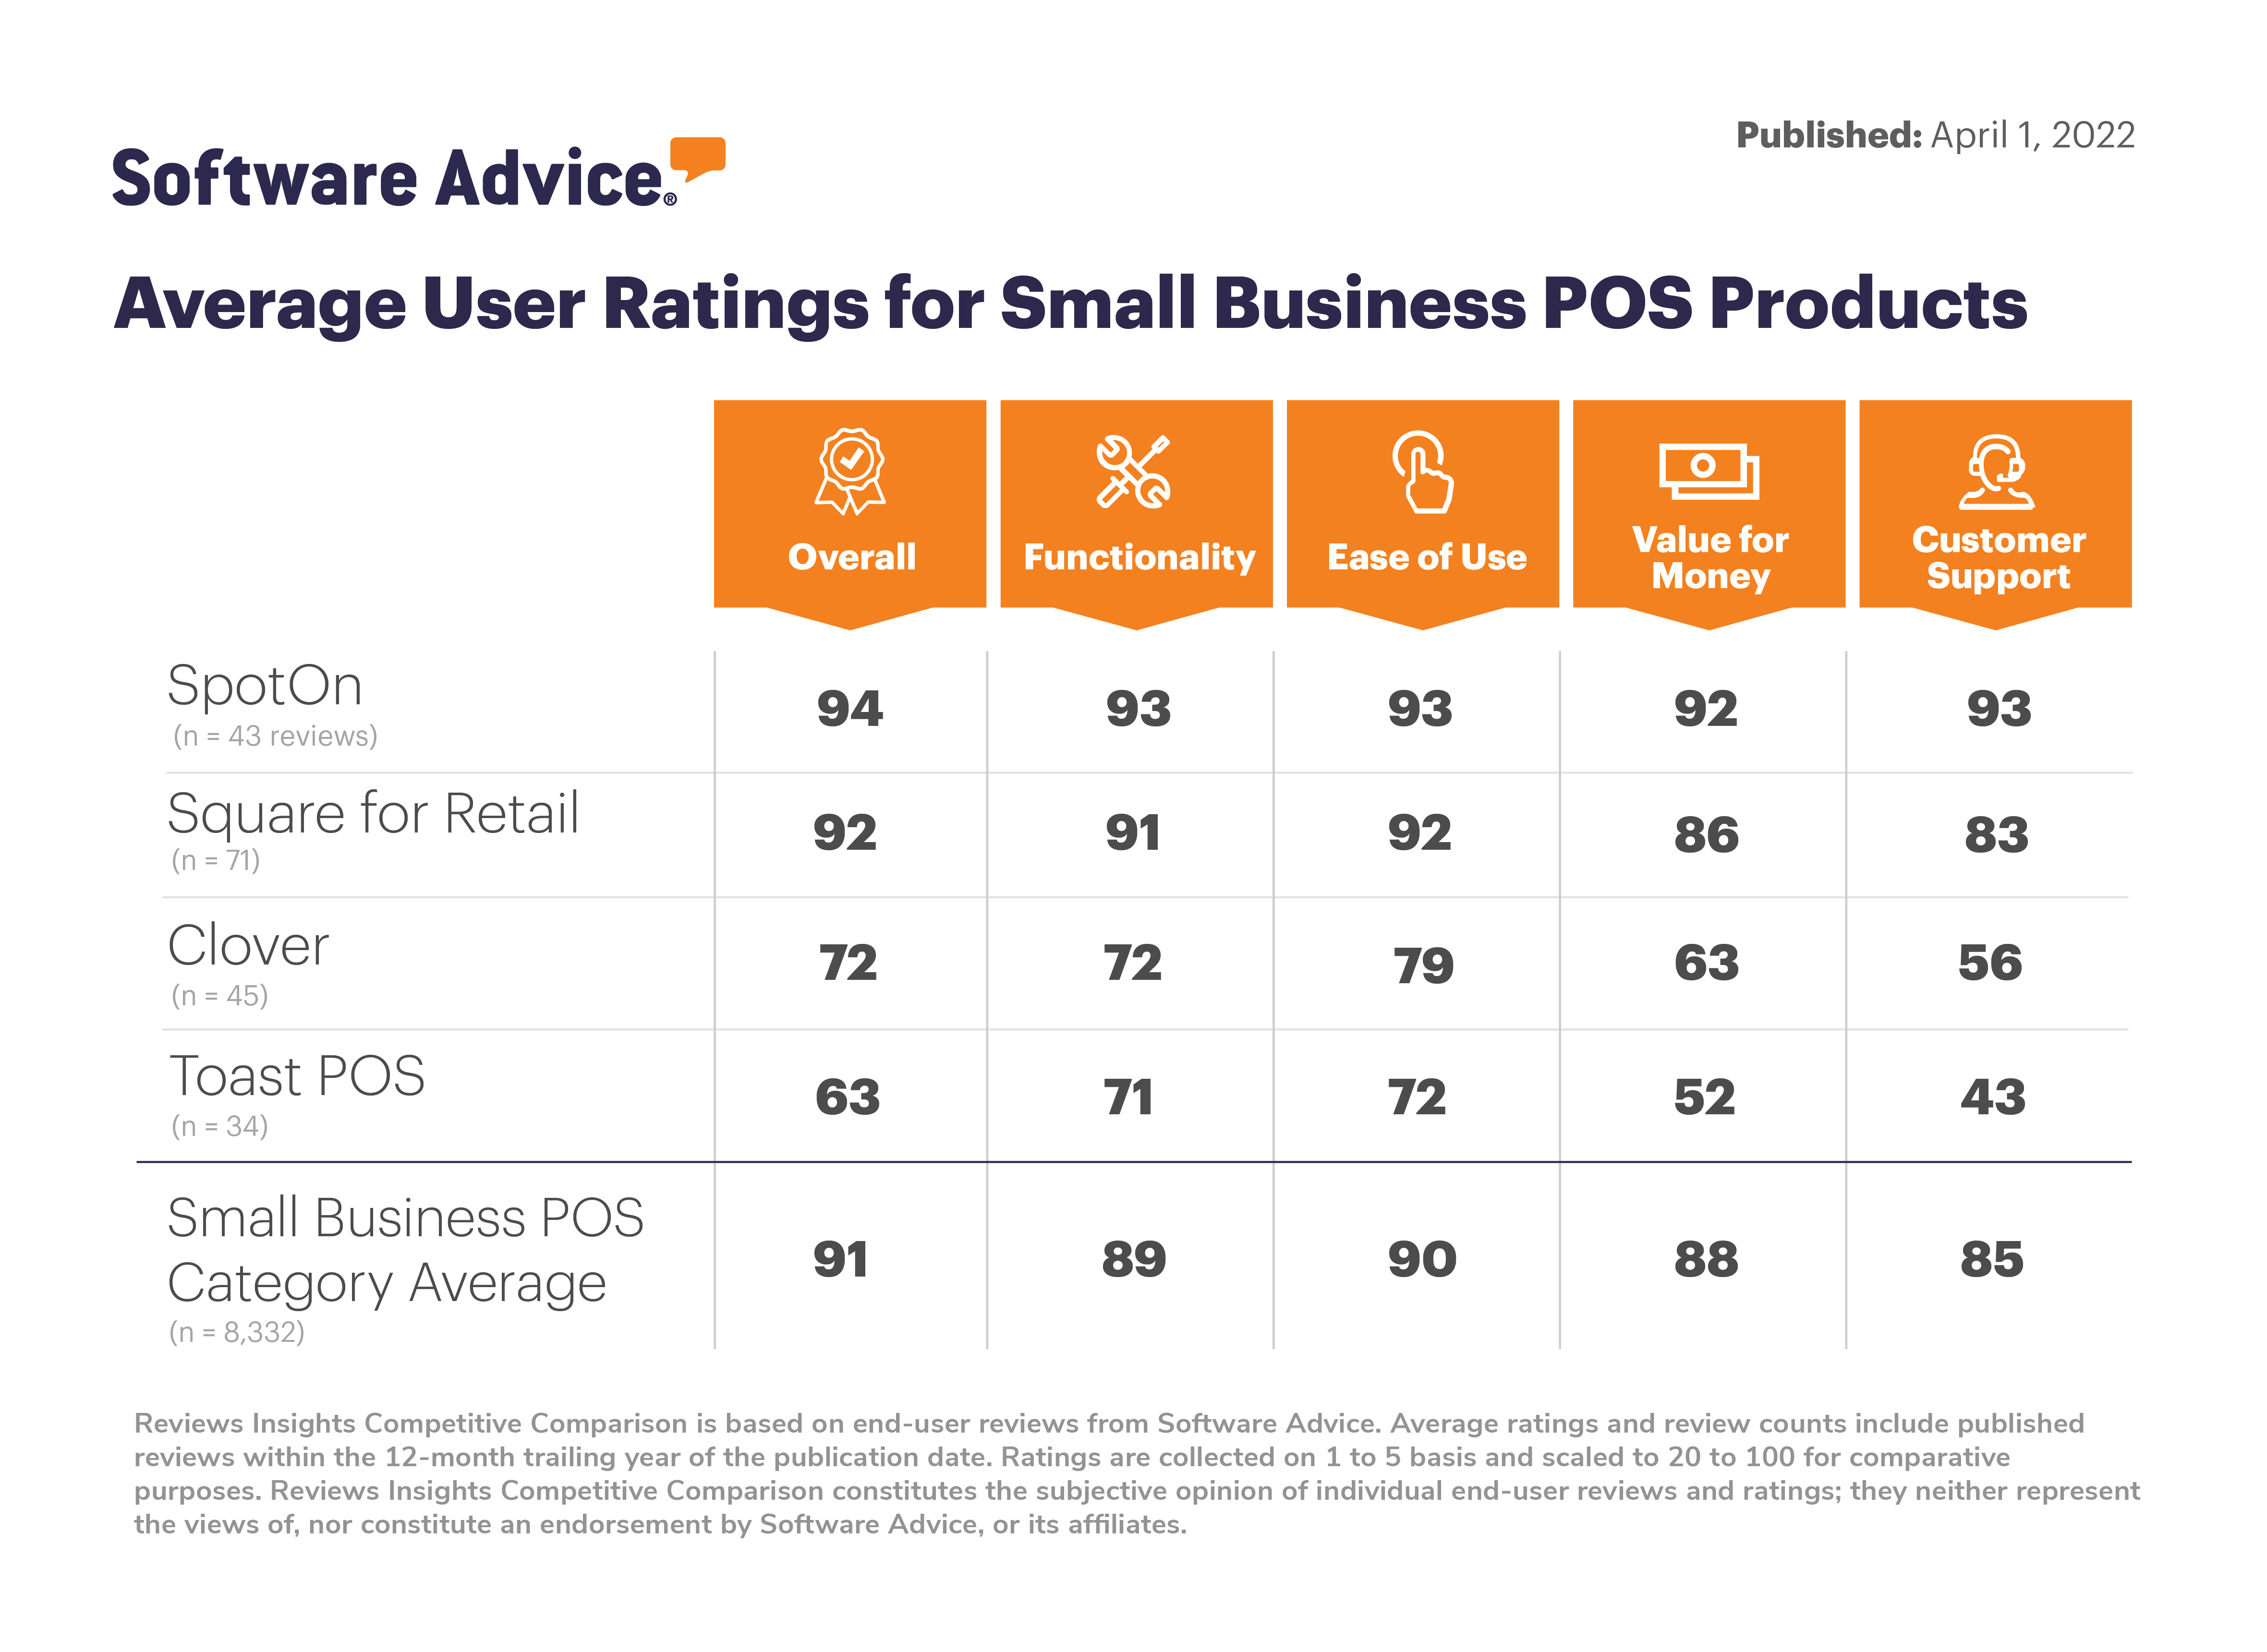 Software Advice average user ratings from small business POS products: SpotOn 94, Square 92, Clover 72, Toast 63